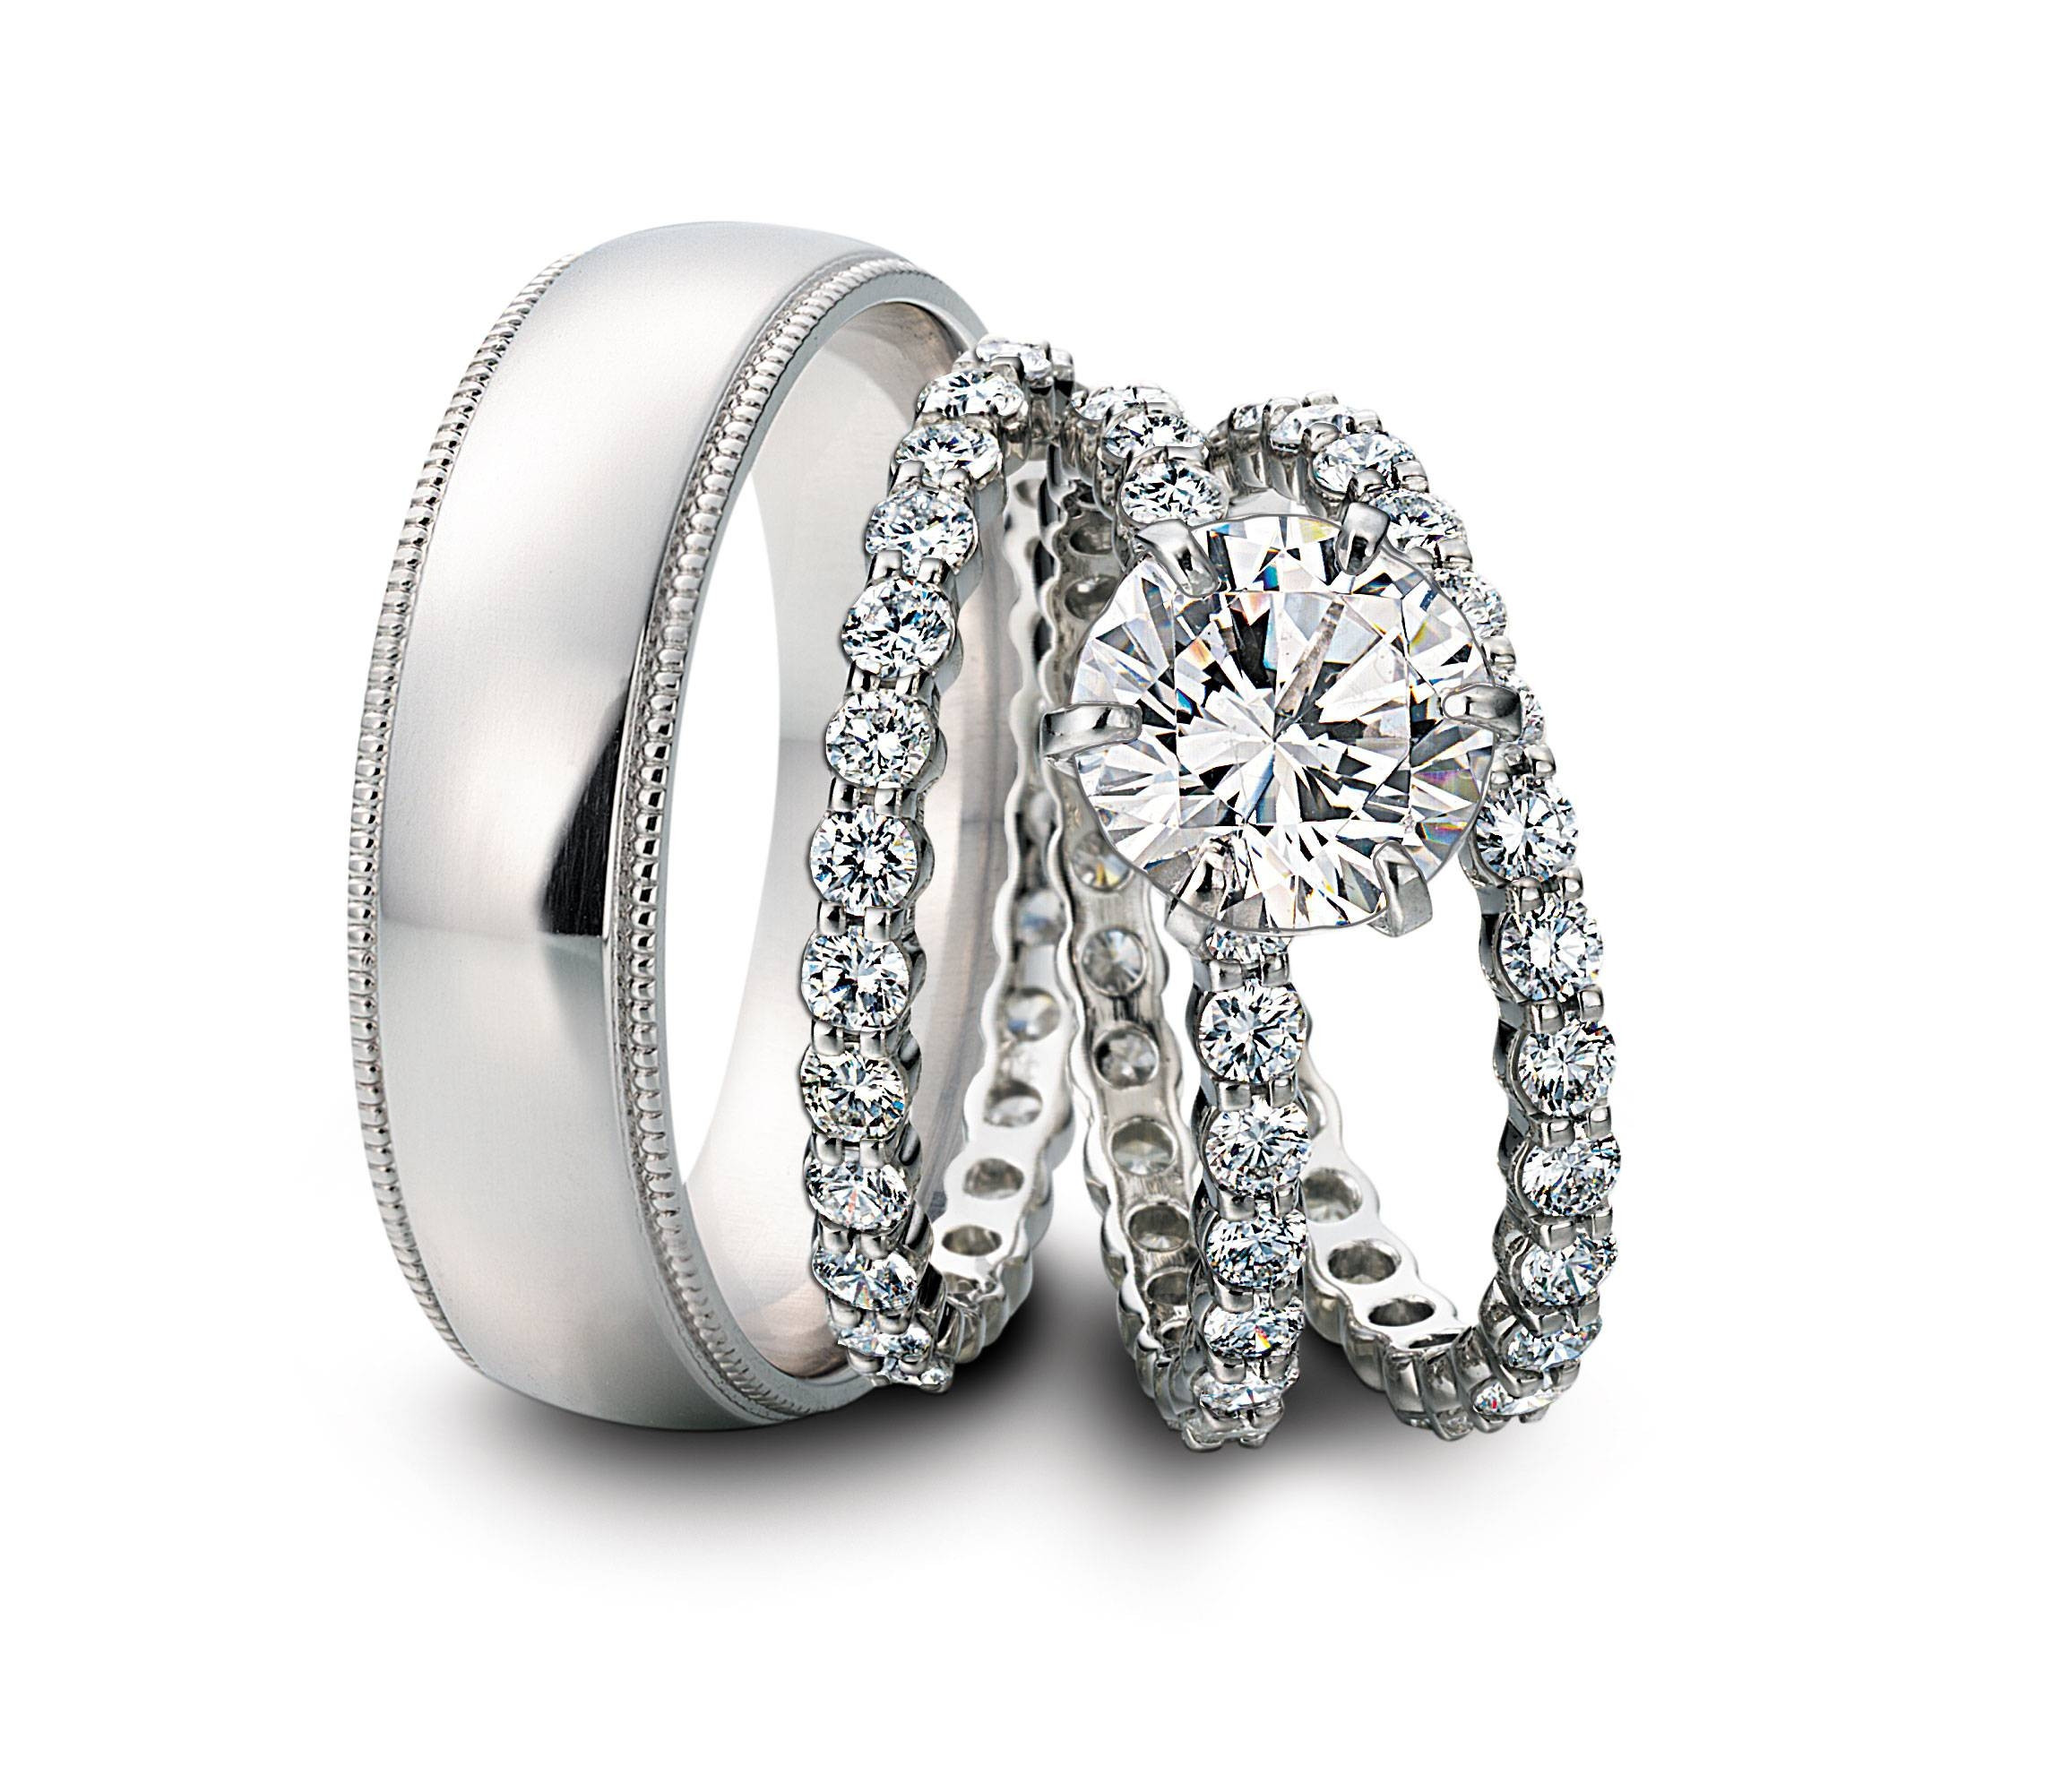 Affordable Wedding Rings For Him And Her
 15 Inspirations of Cheap Wedding Bands Sets His And Hers